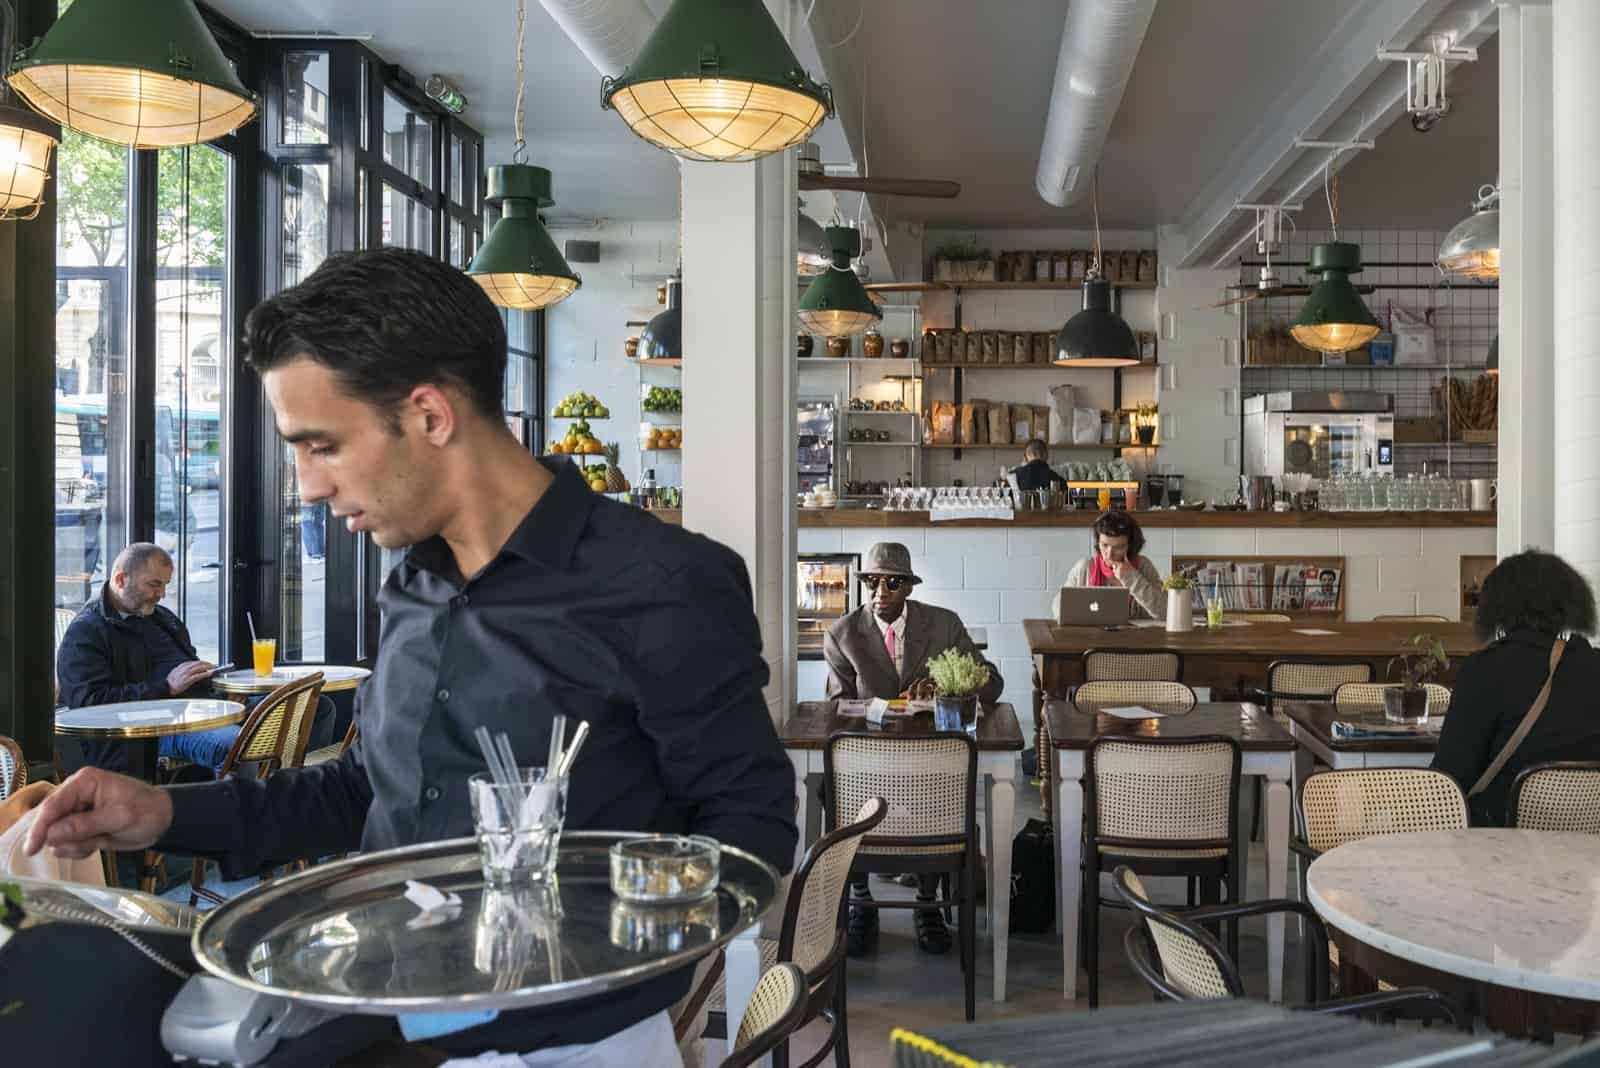 Enjoy a meal or an apero at Brasserie Barbès, a terrace overlooking Paris' up-and-coming Barbès neighborhood